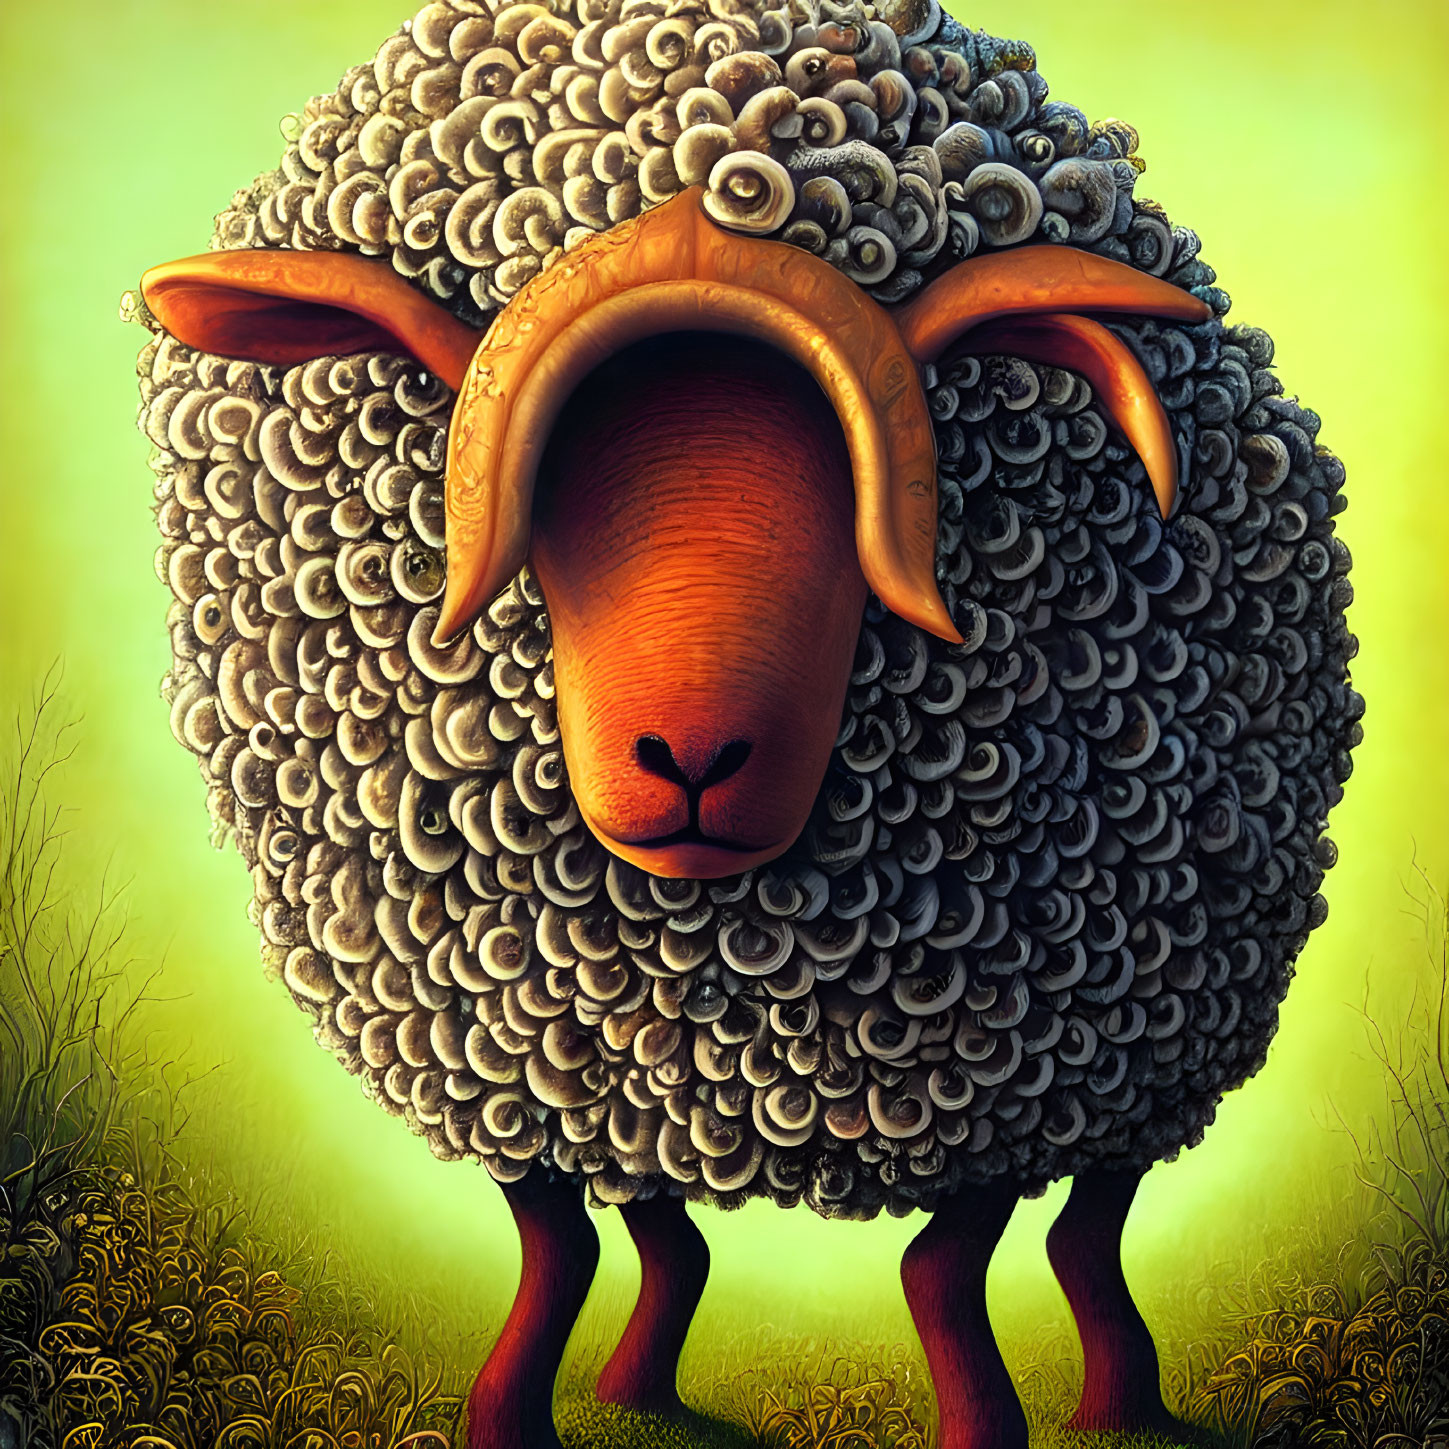 Illustration of whimsical sheep with curly fleece in golden meadow